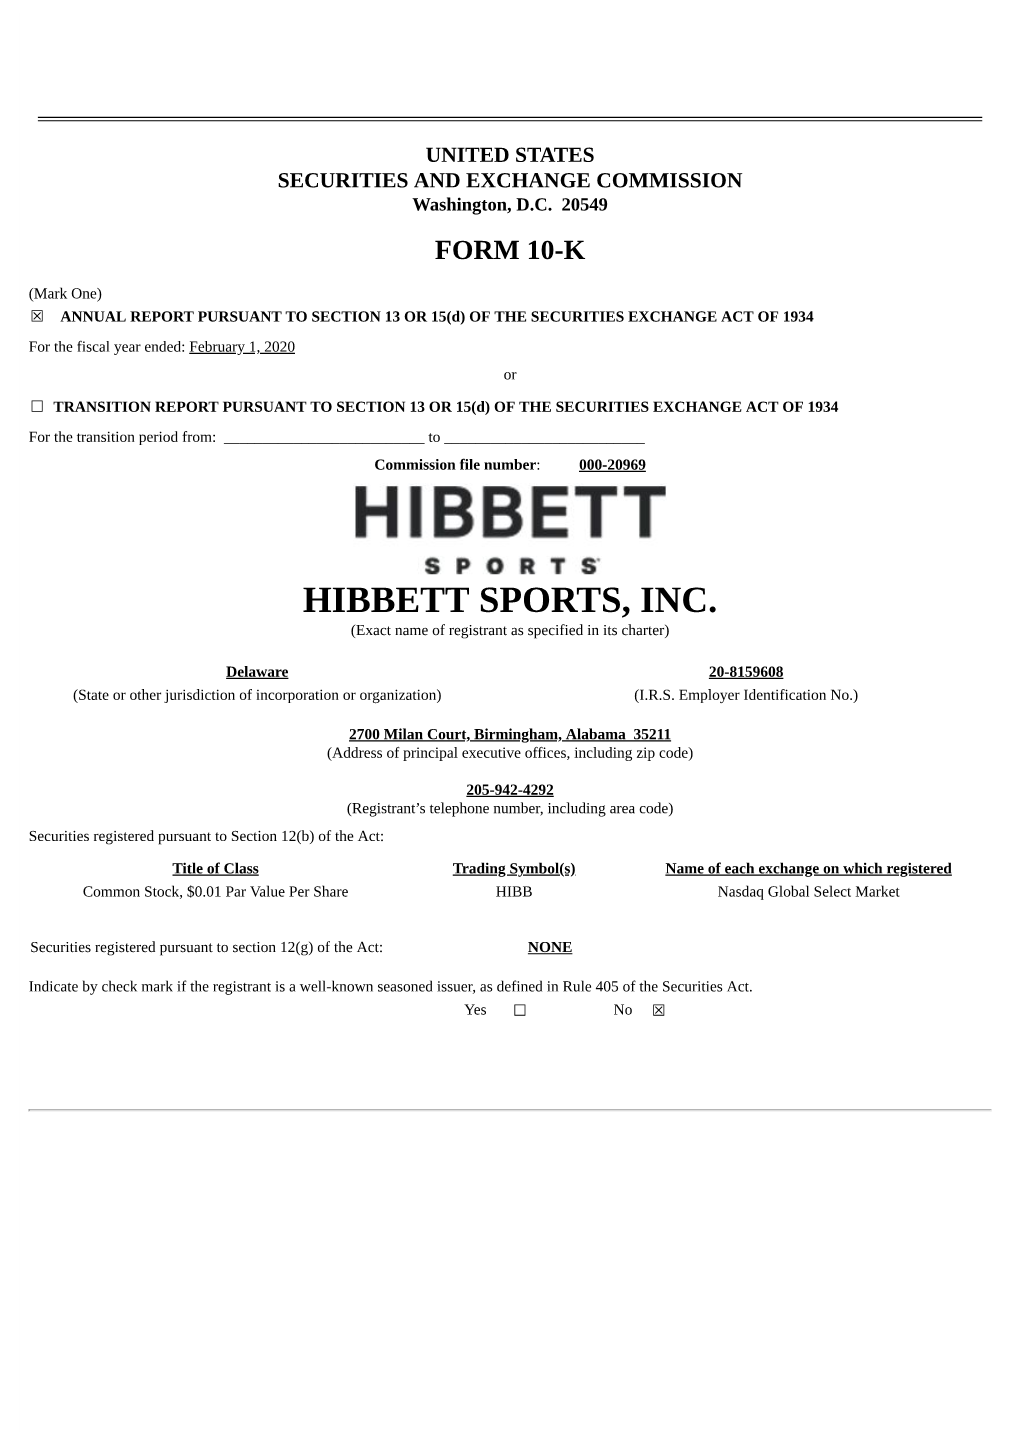 HIBBETT SPORTS, INC. (Exact Name of Registrant As Specified in Its Charter)